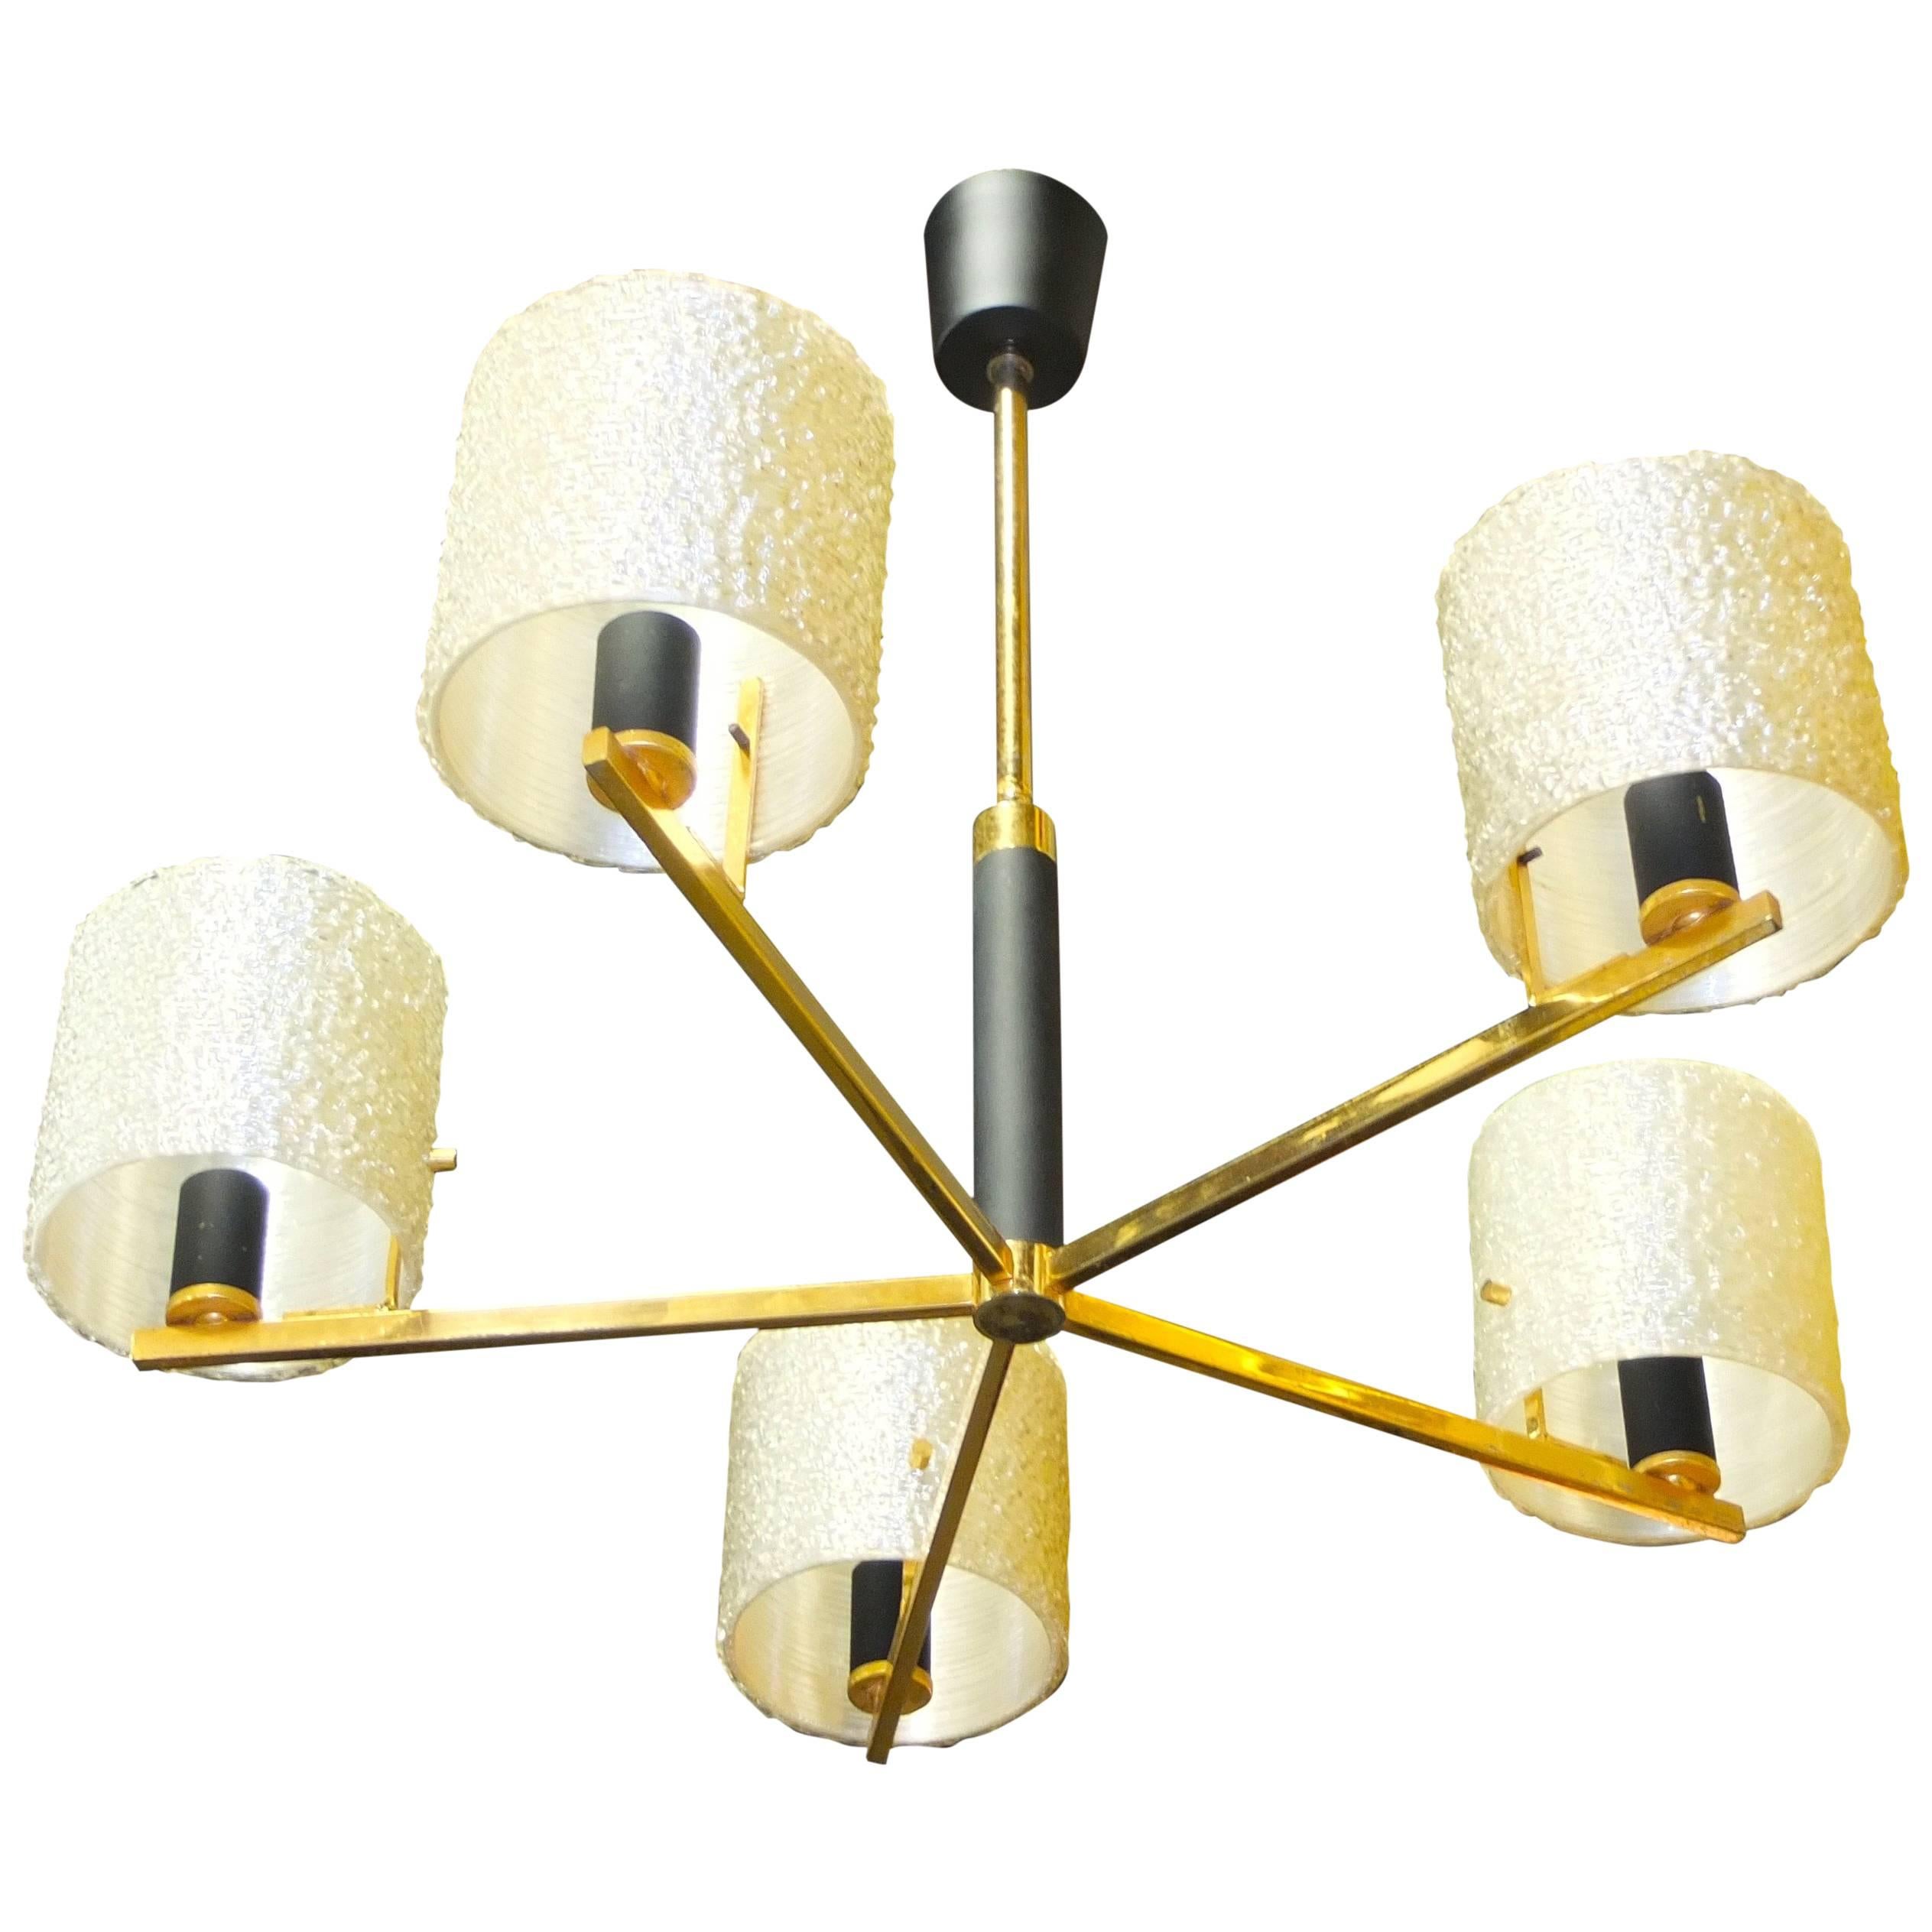 Maison Arlus Five-Arm Brass Chandelier with Spun Resin Shades